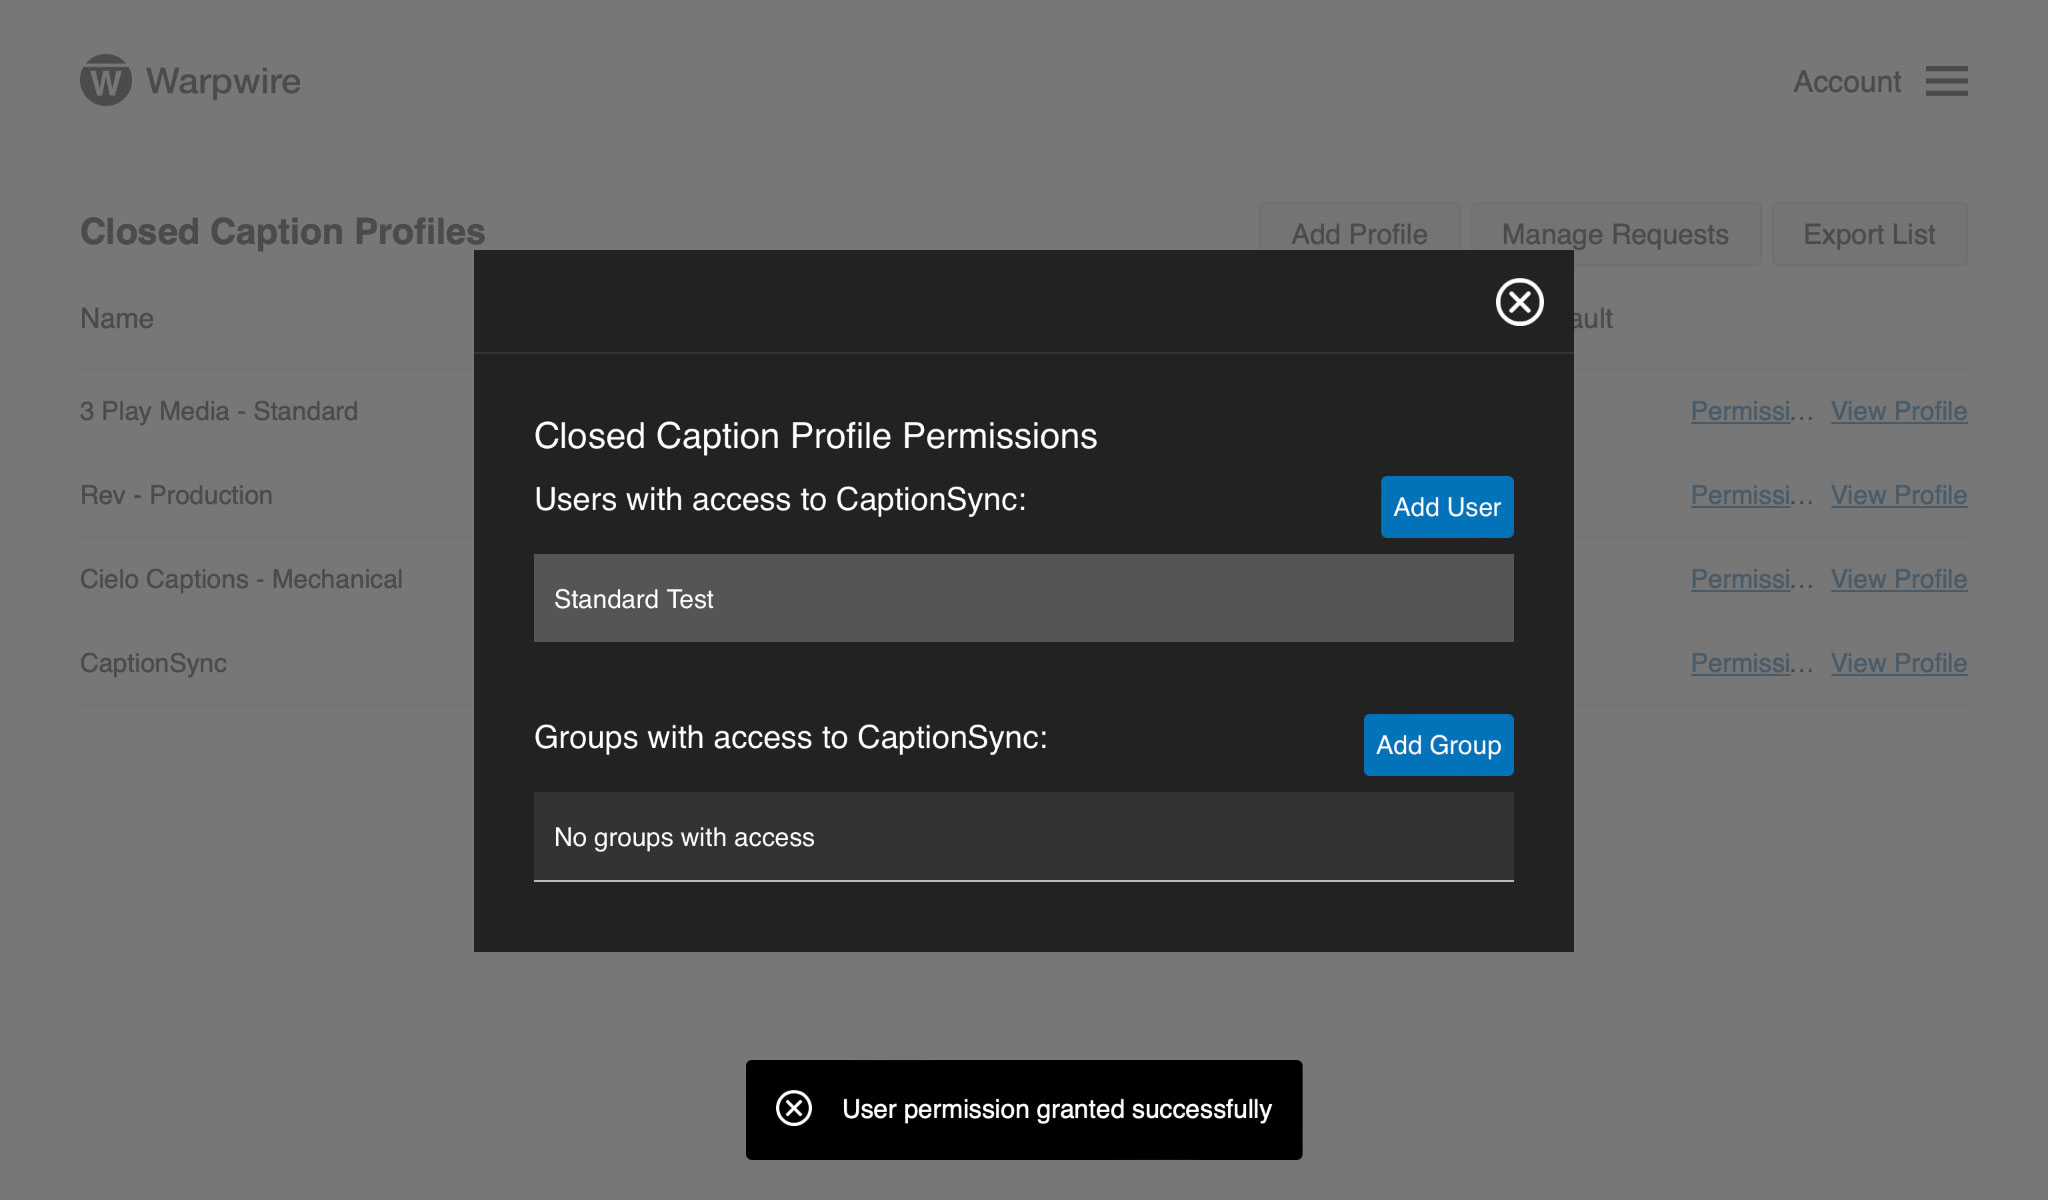 Closed Caption Profiles Permission workflow, successfully added a user permission